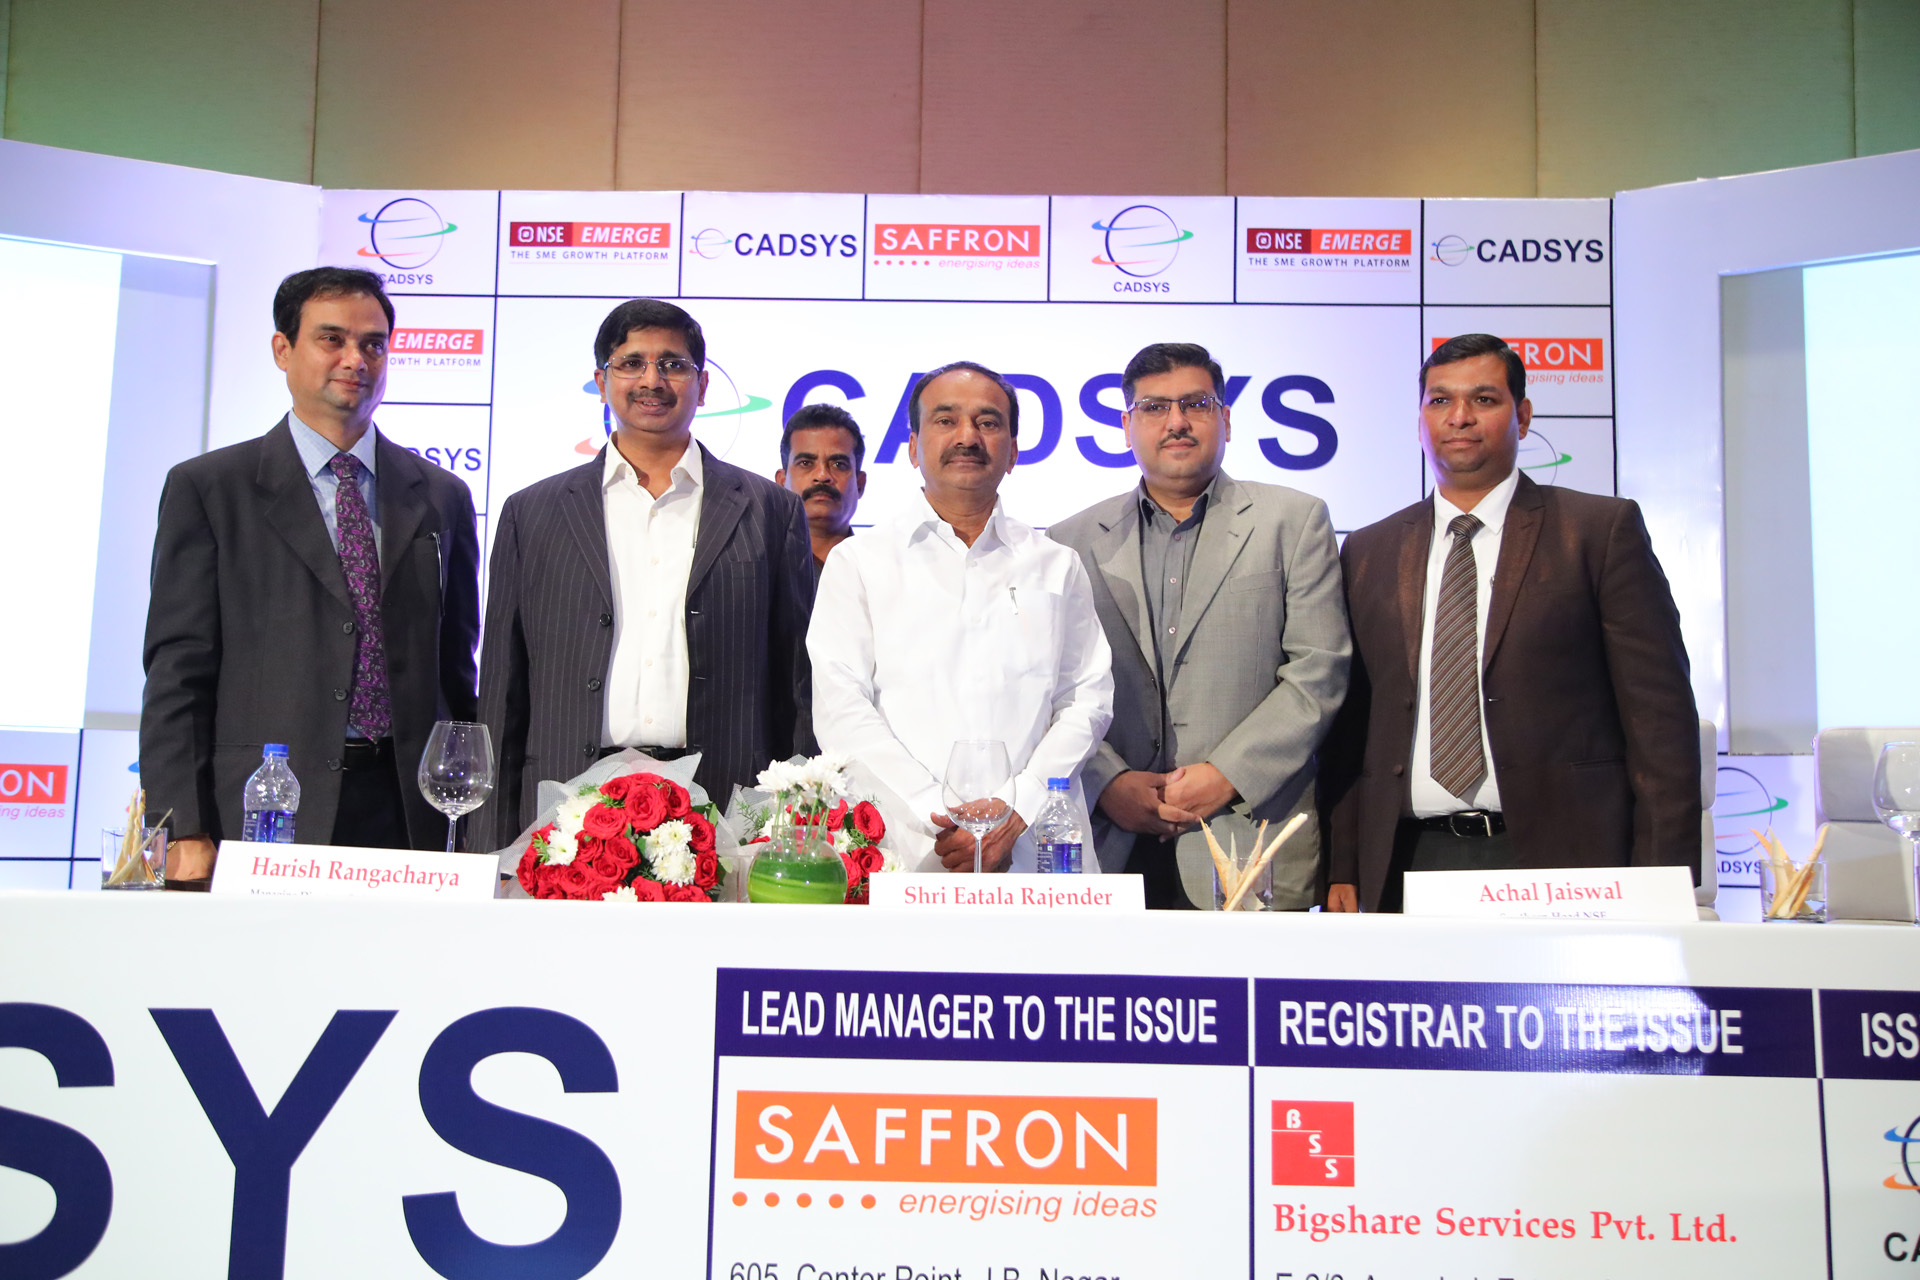 Cadsys (India) Limited has successfully completed its Initial Public Offer and is listed on National Stock Exchange EMERGE. On October 4th, 2017, the Company hosted its Listing Ceremony marking trading of the shares on the NSE EMERGE platform.